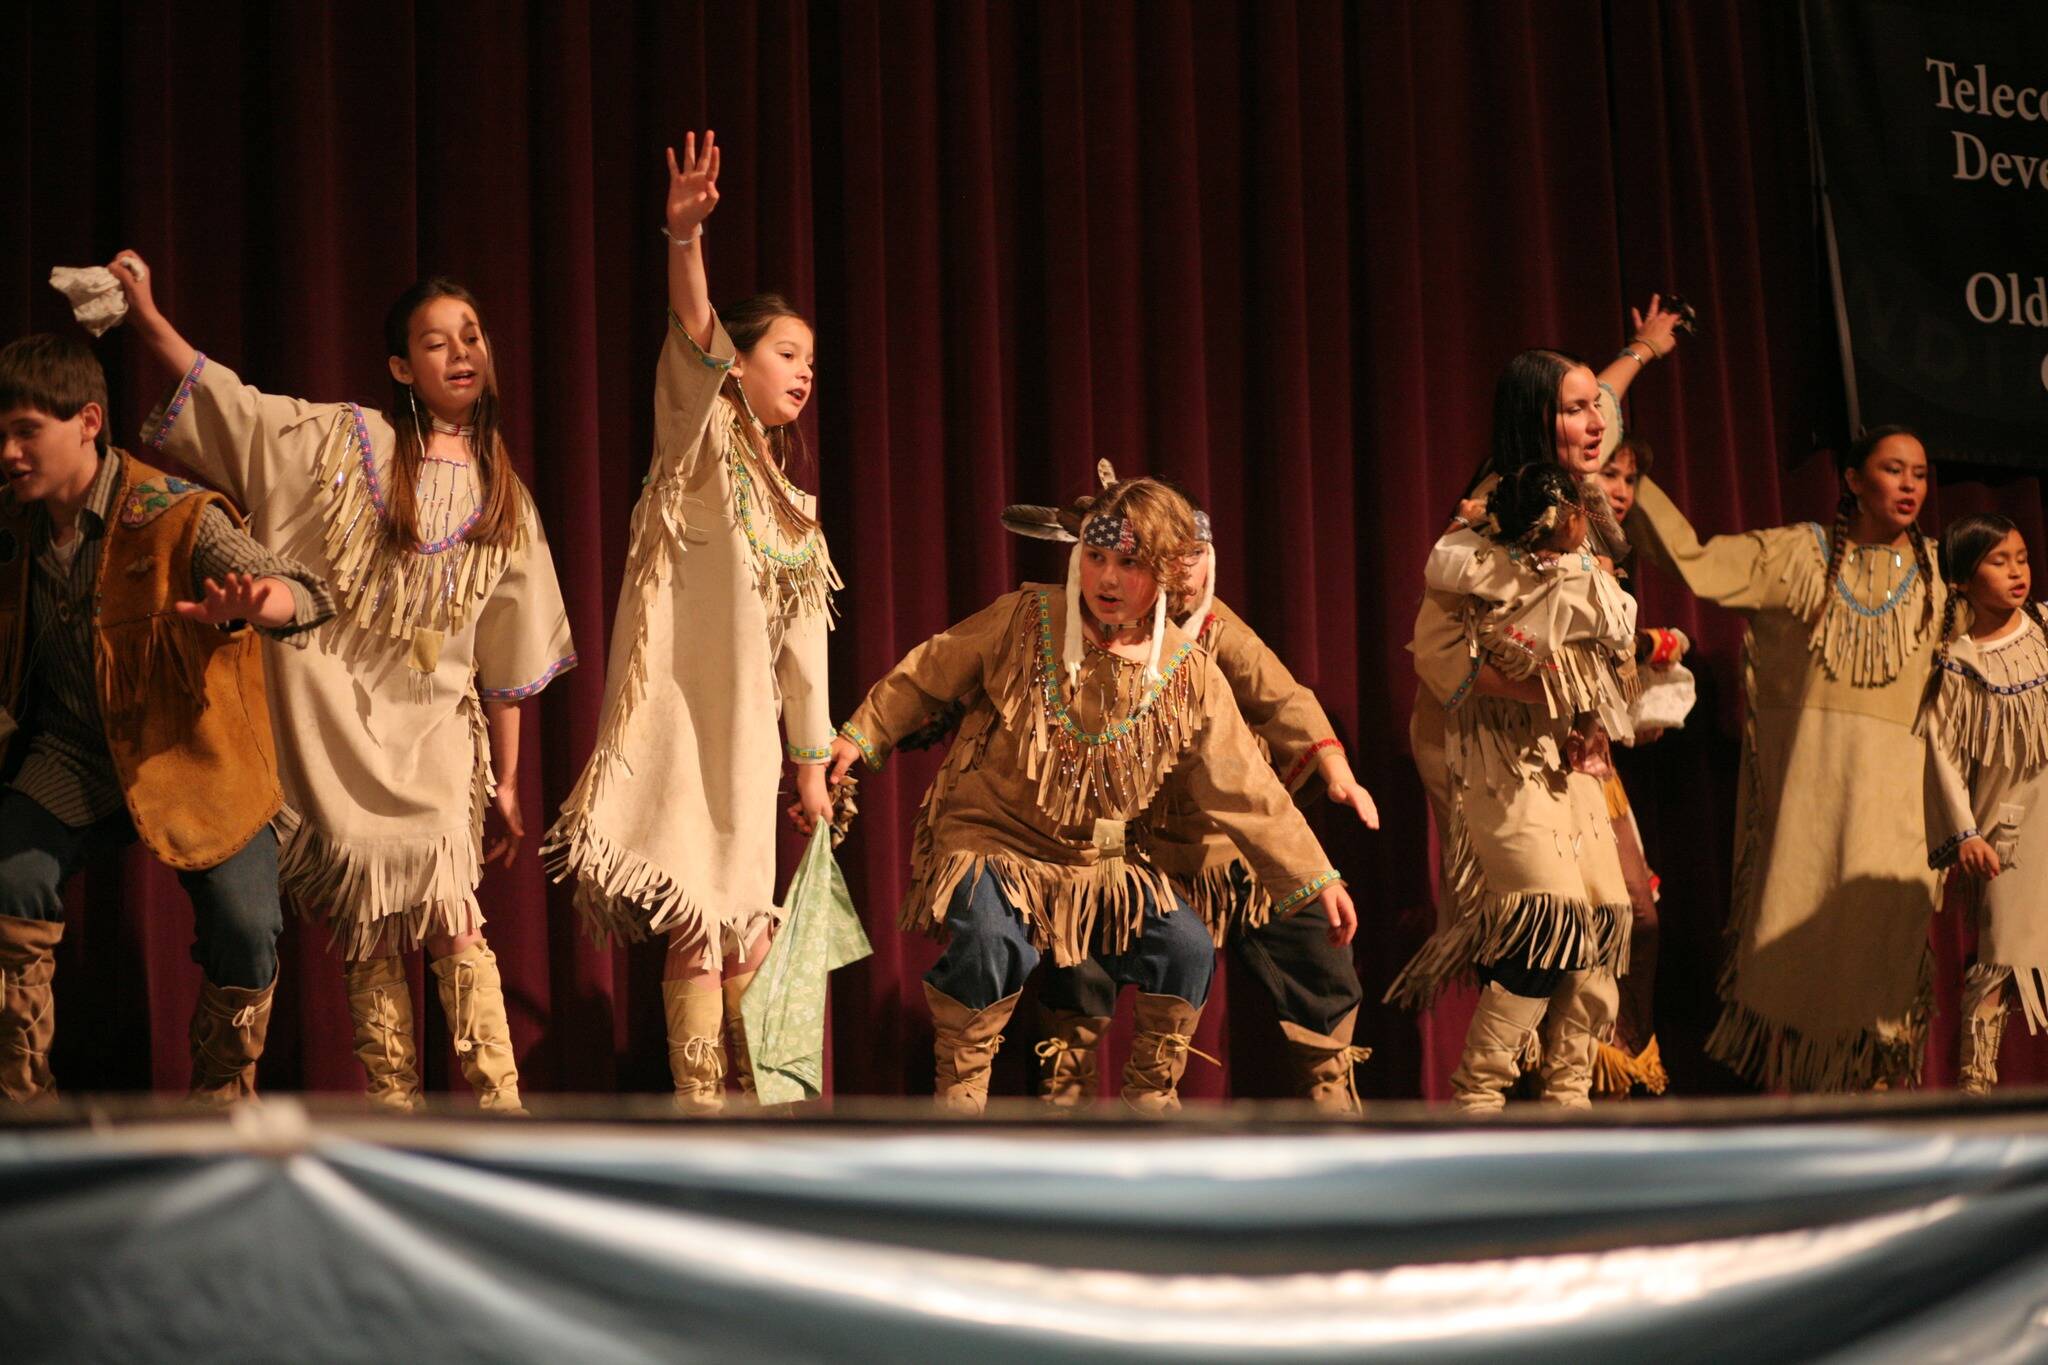 Alaska Federation of Natives 
Youths perform during the 2019 Alaska Federation of Natives convention in Fairbanks. The convention, which AFN says is the largest representative annual gathering in the United States of Native peoples, is meeting in-person for the first time in two years from Oct. 20-22 in Anchorage.